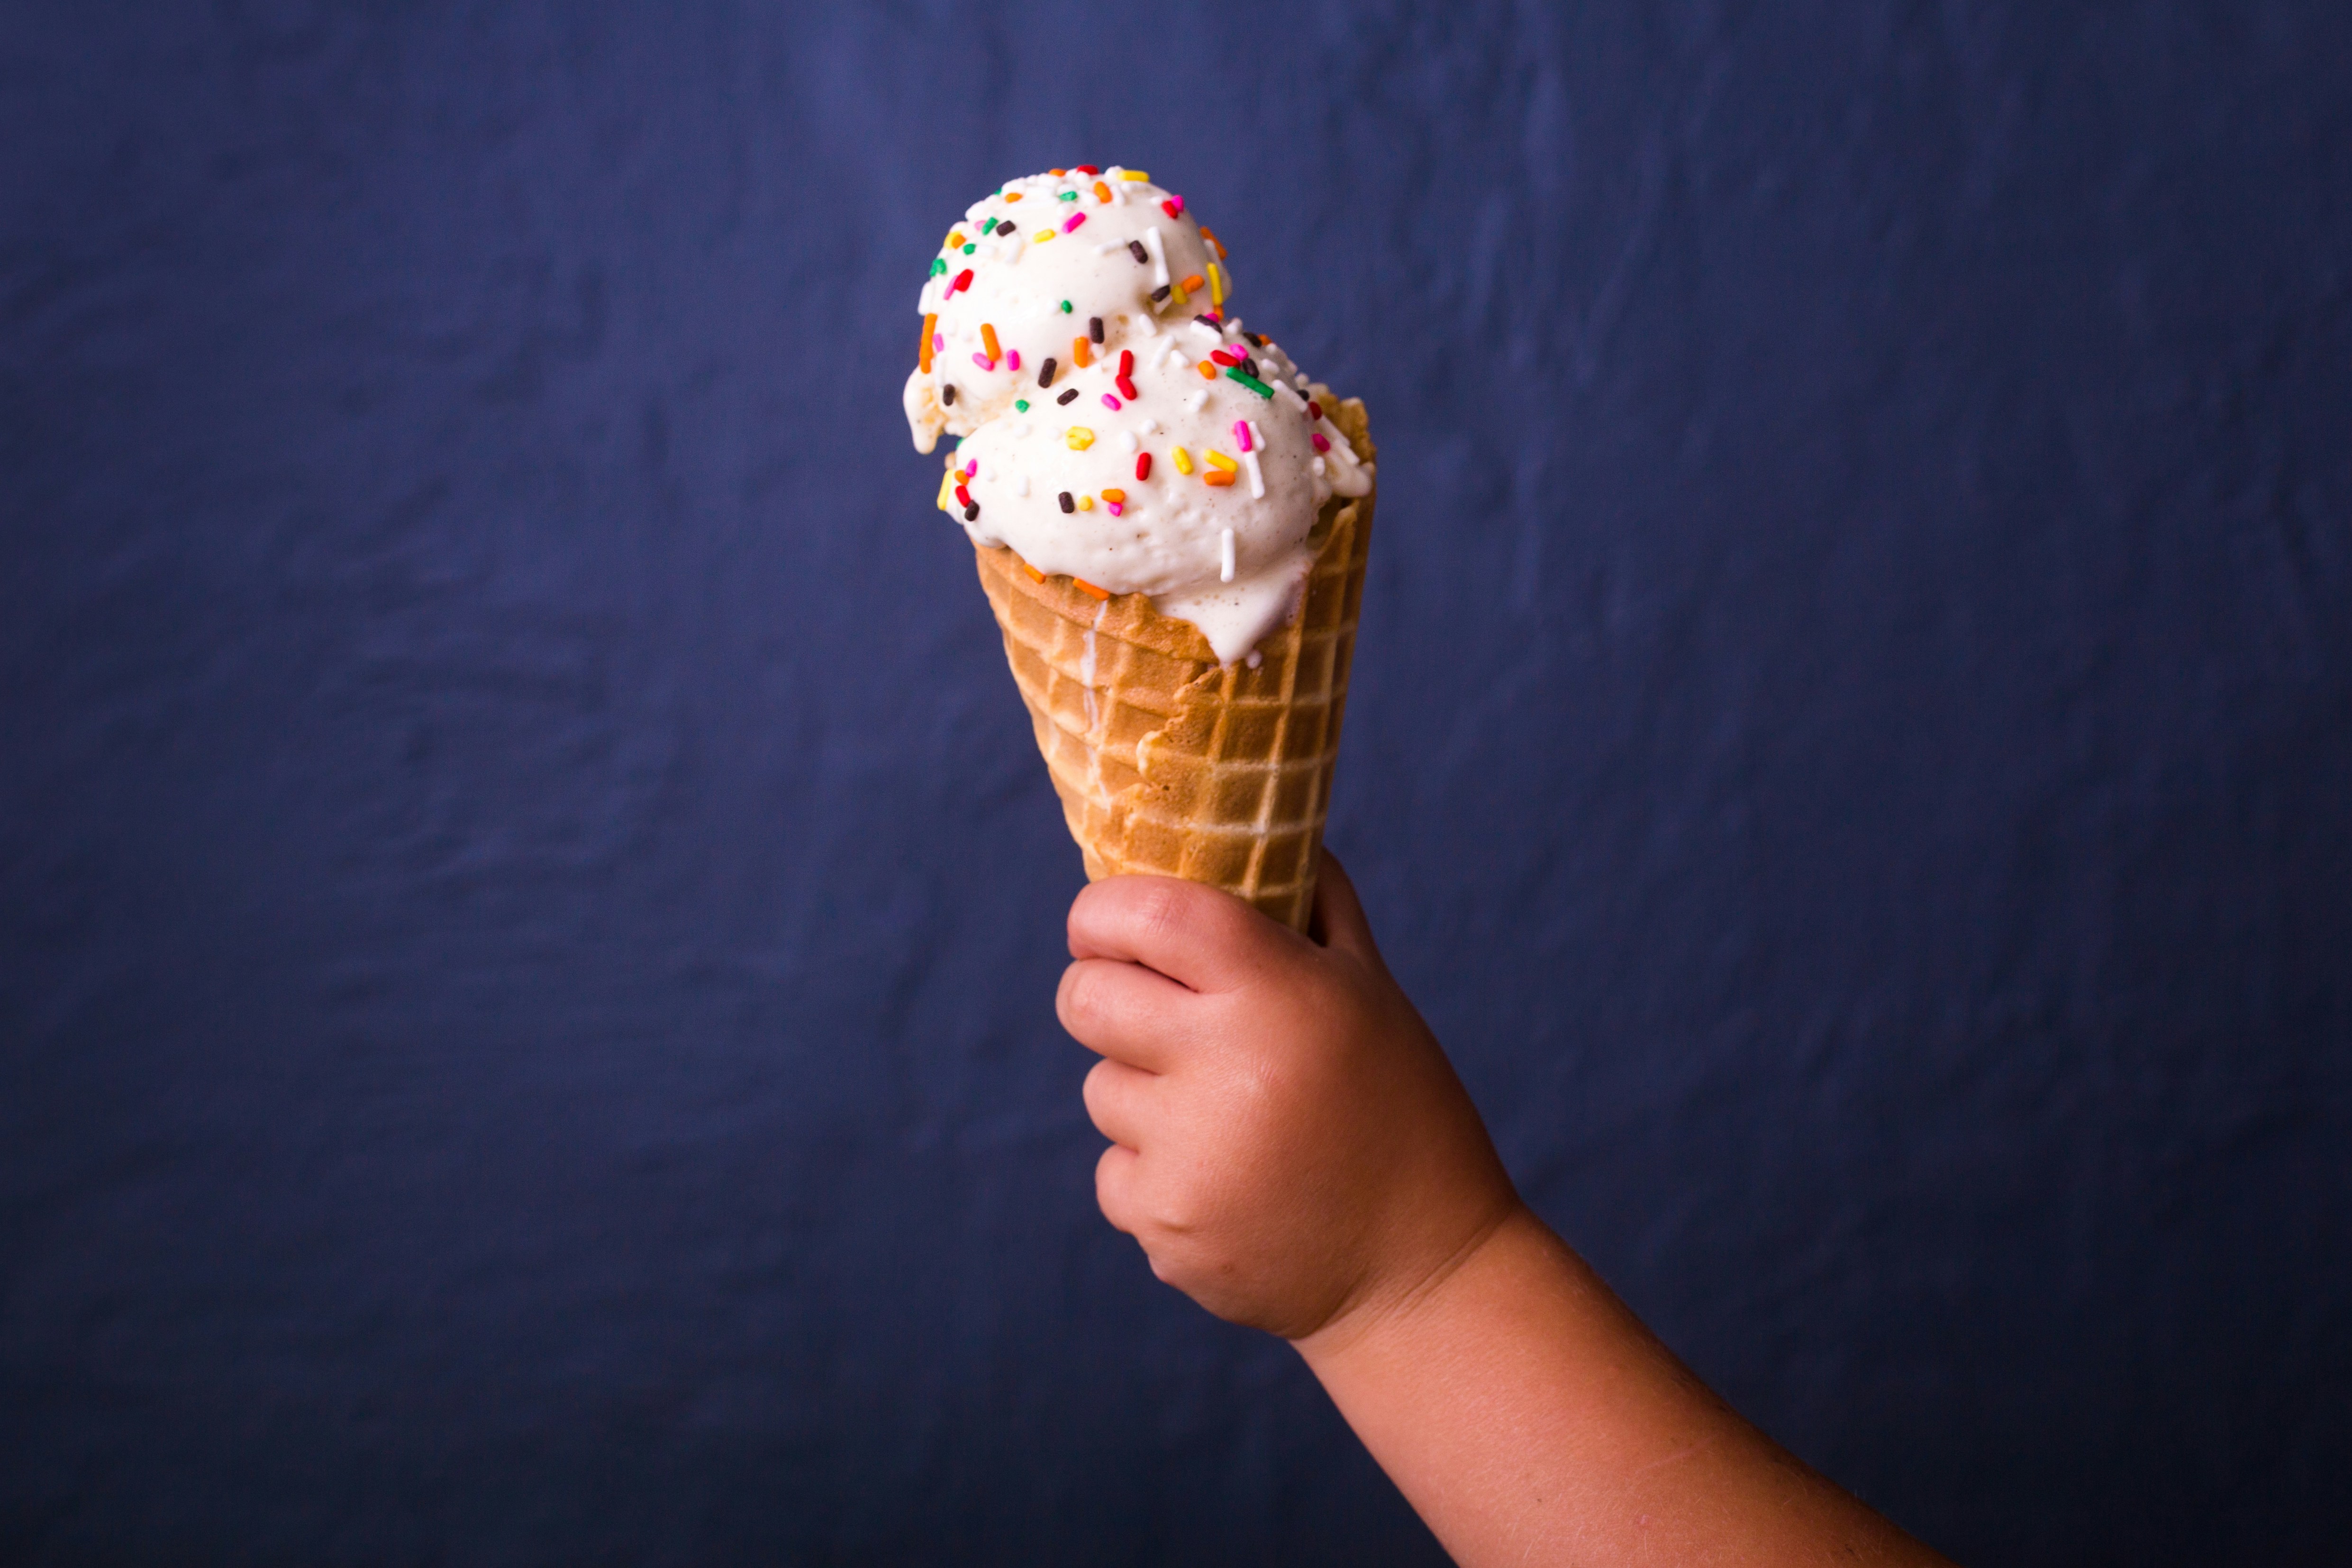 Toddler holding ice cream cone with sprinkles